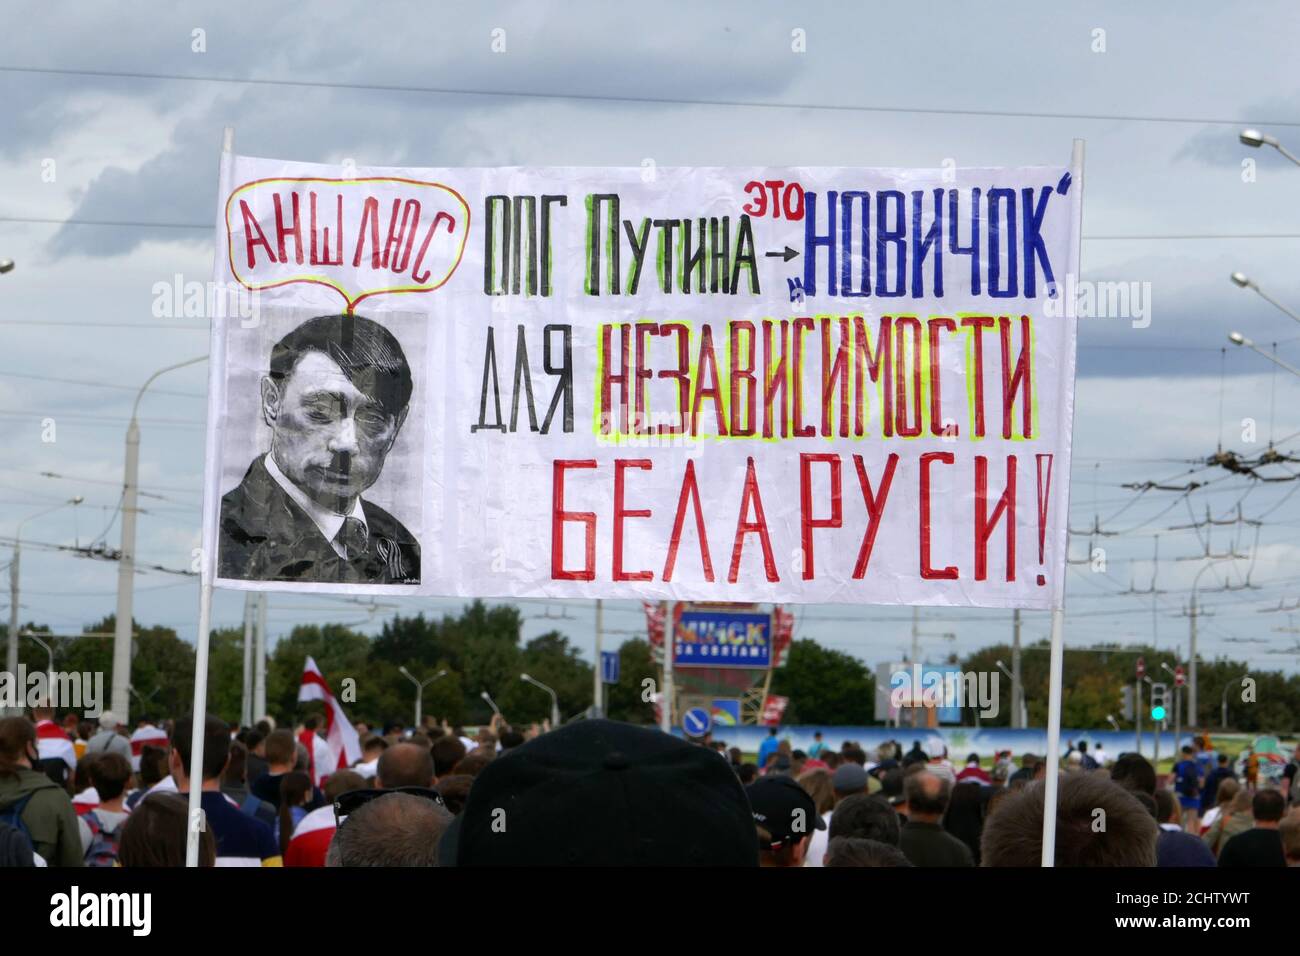 Minsk, Belarus - September 13, 2020. People with flags, placards and banners at a peaceful protest in Minsk against police lawlessness and Stock Photo